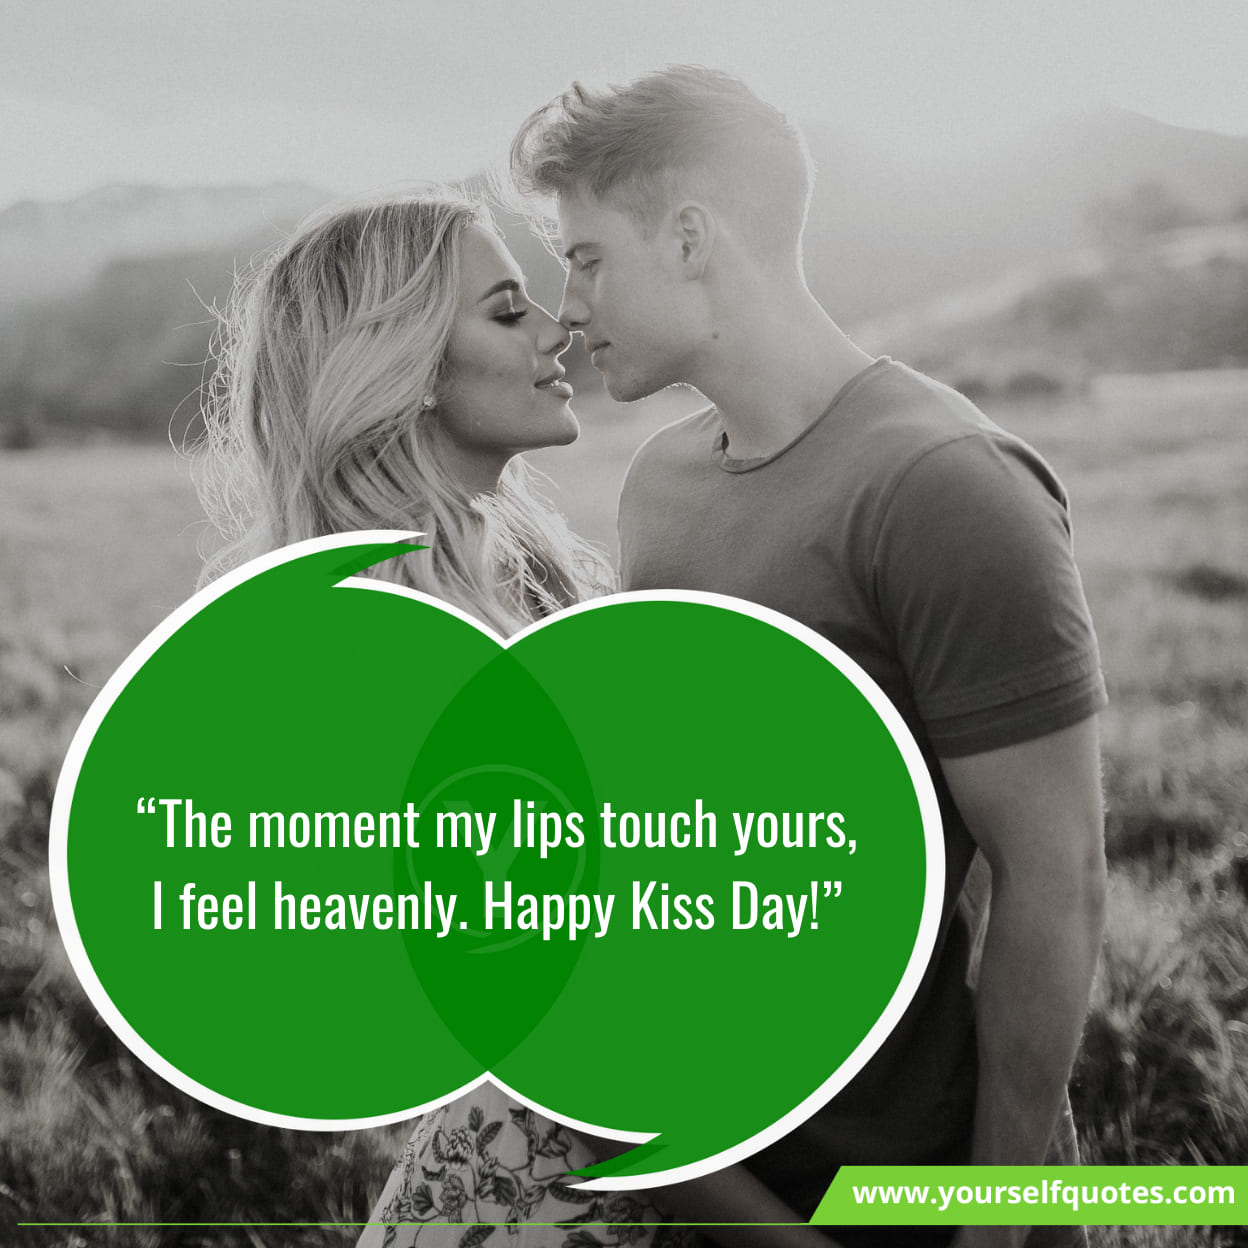 Kiss Day Messages, Sayings & Greetings